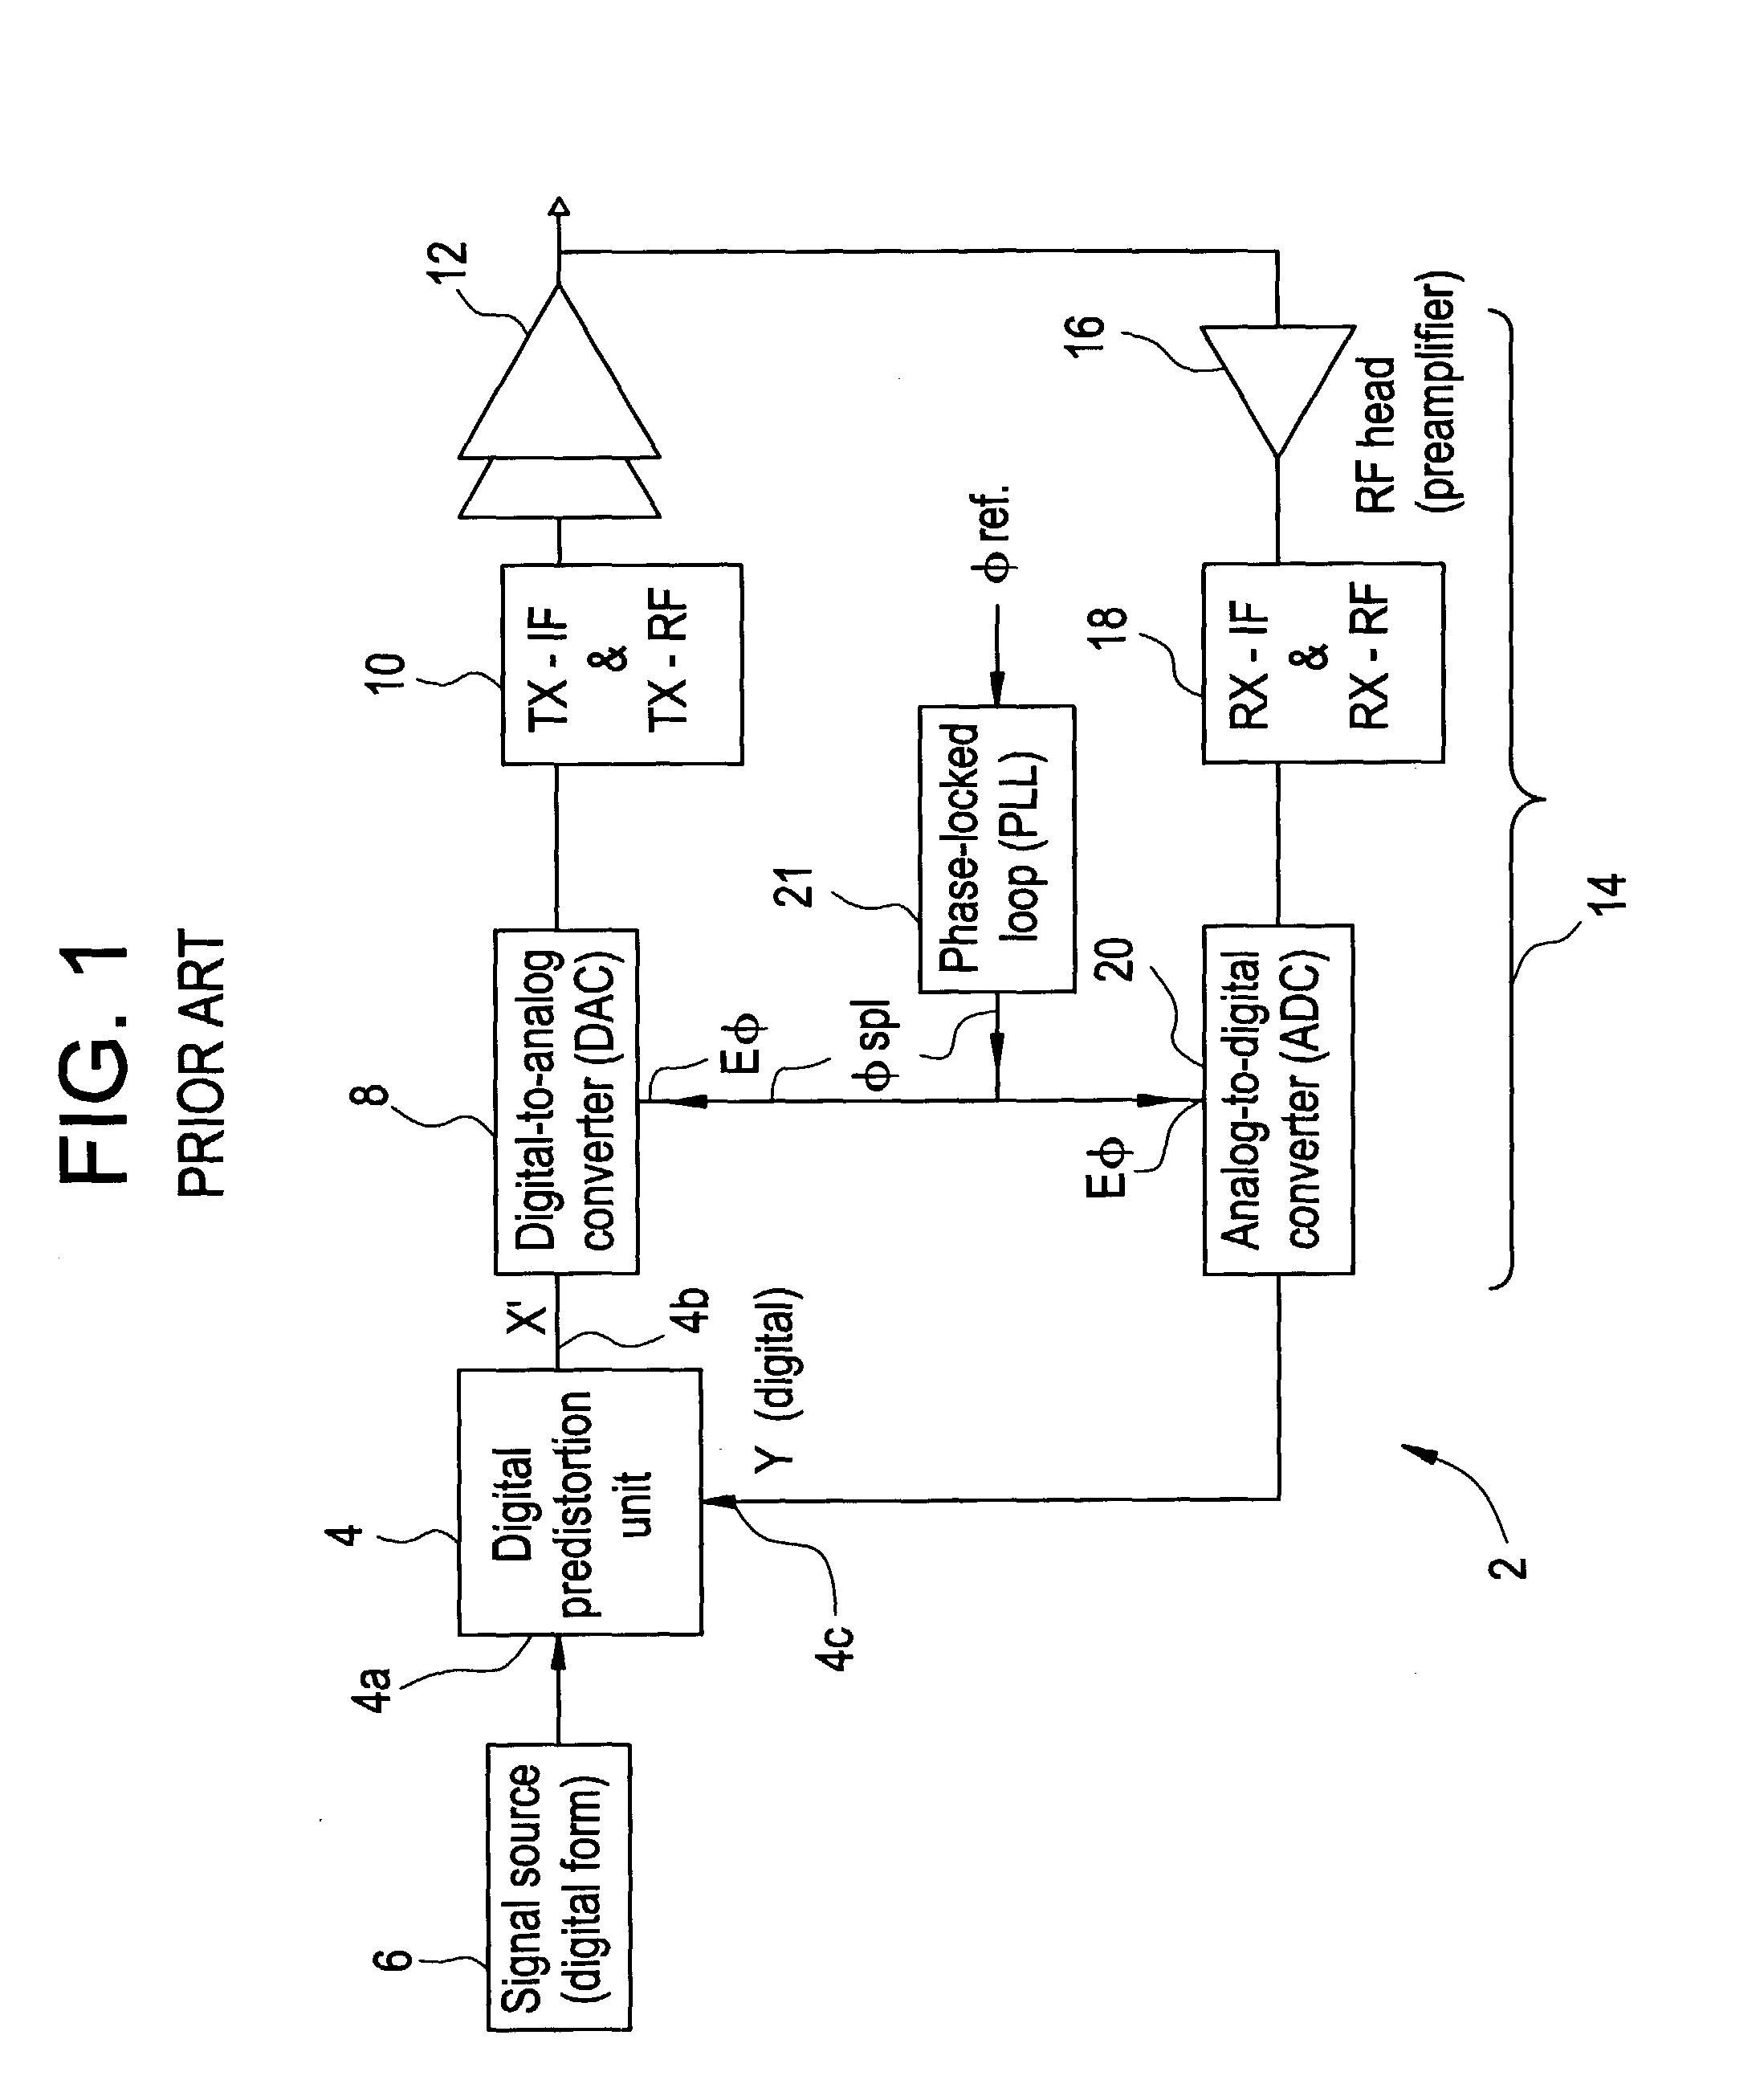 Method and apparatus for preparing signals to be compared to establish predistortion at the input of an amplifier